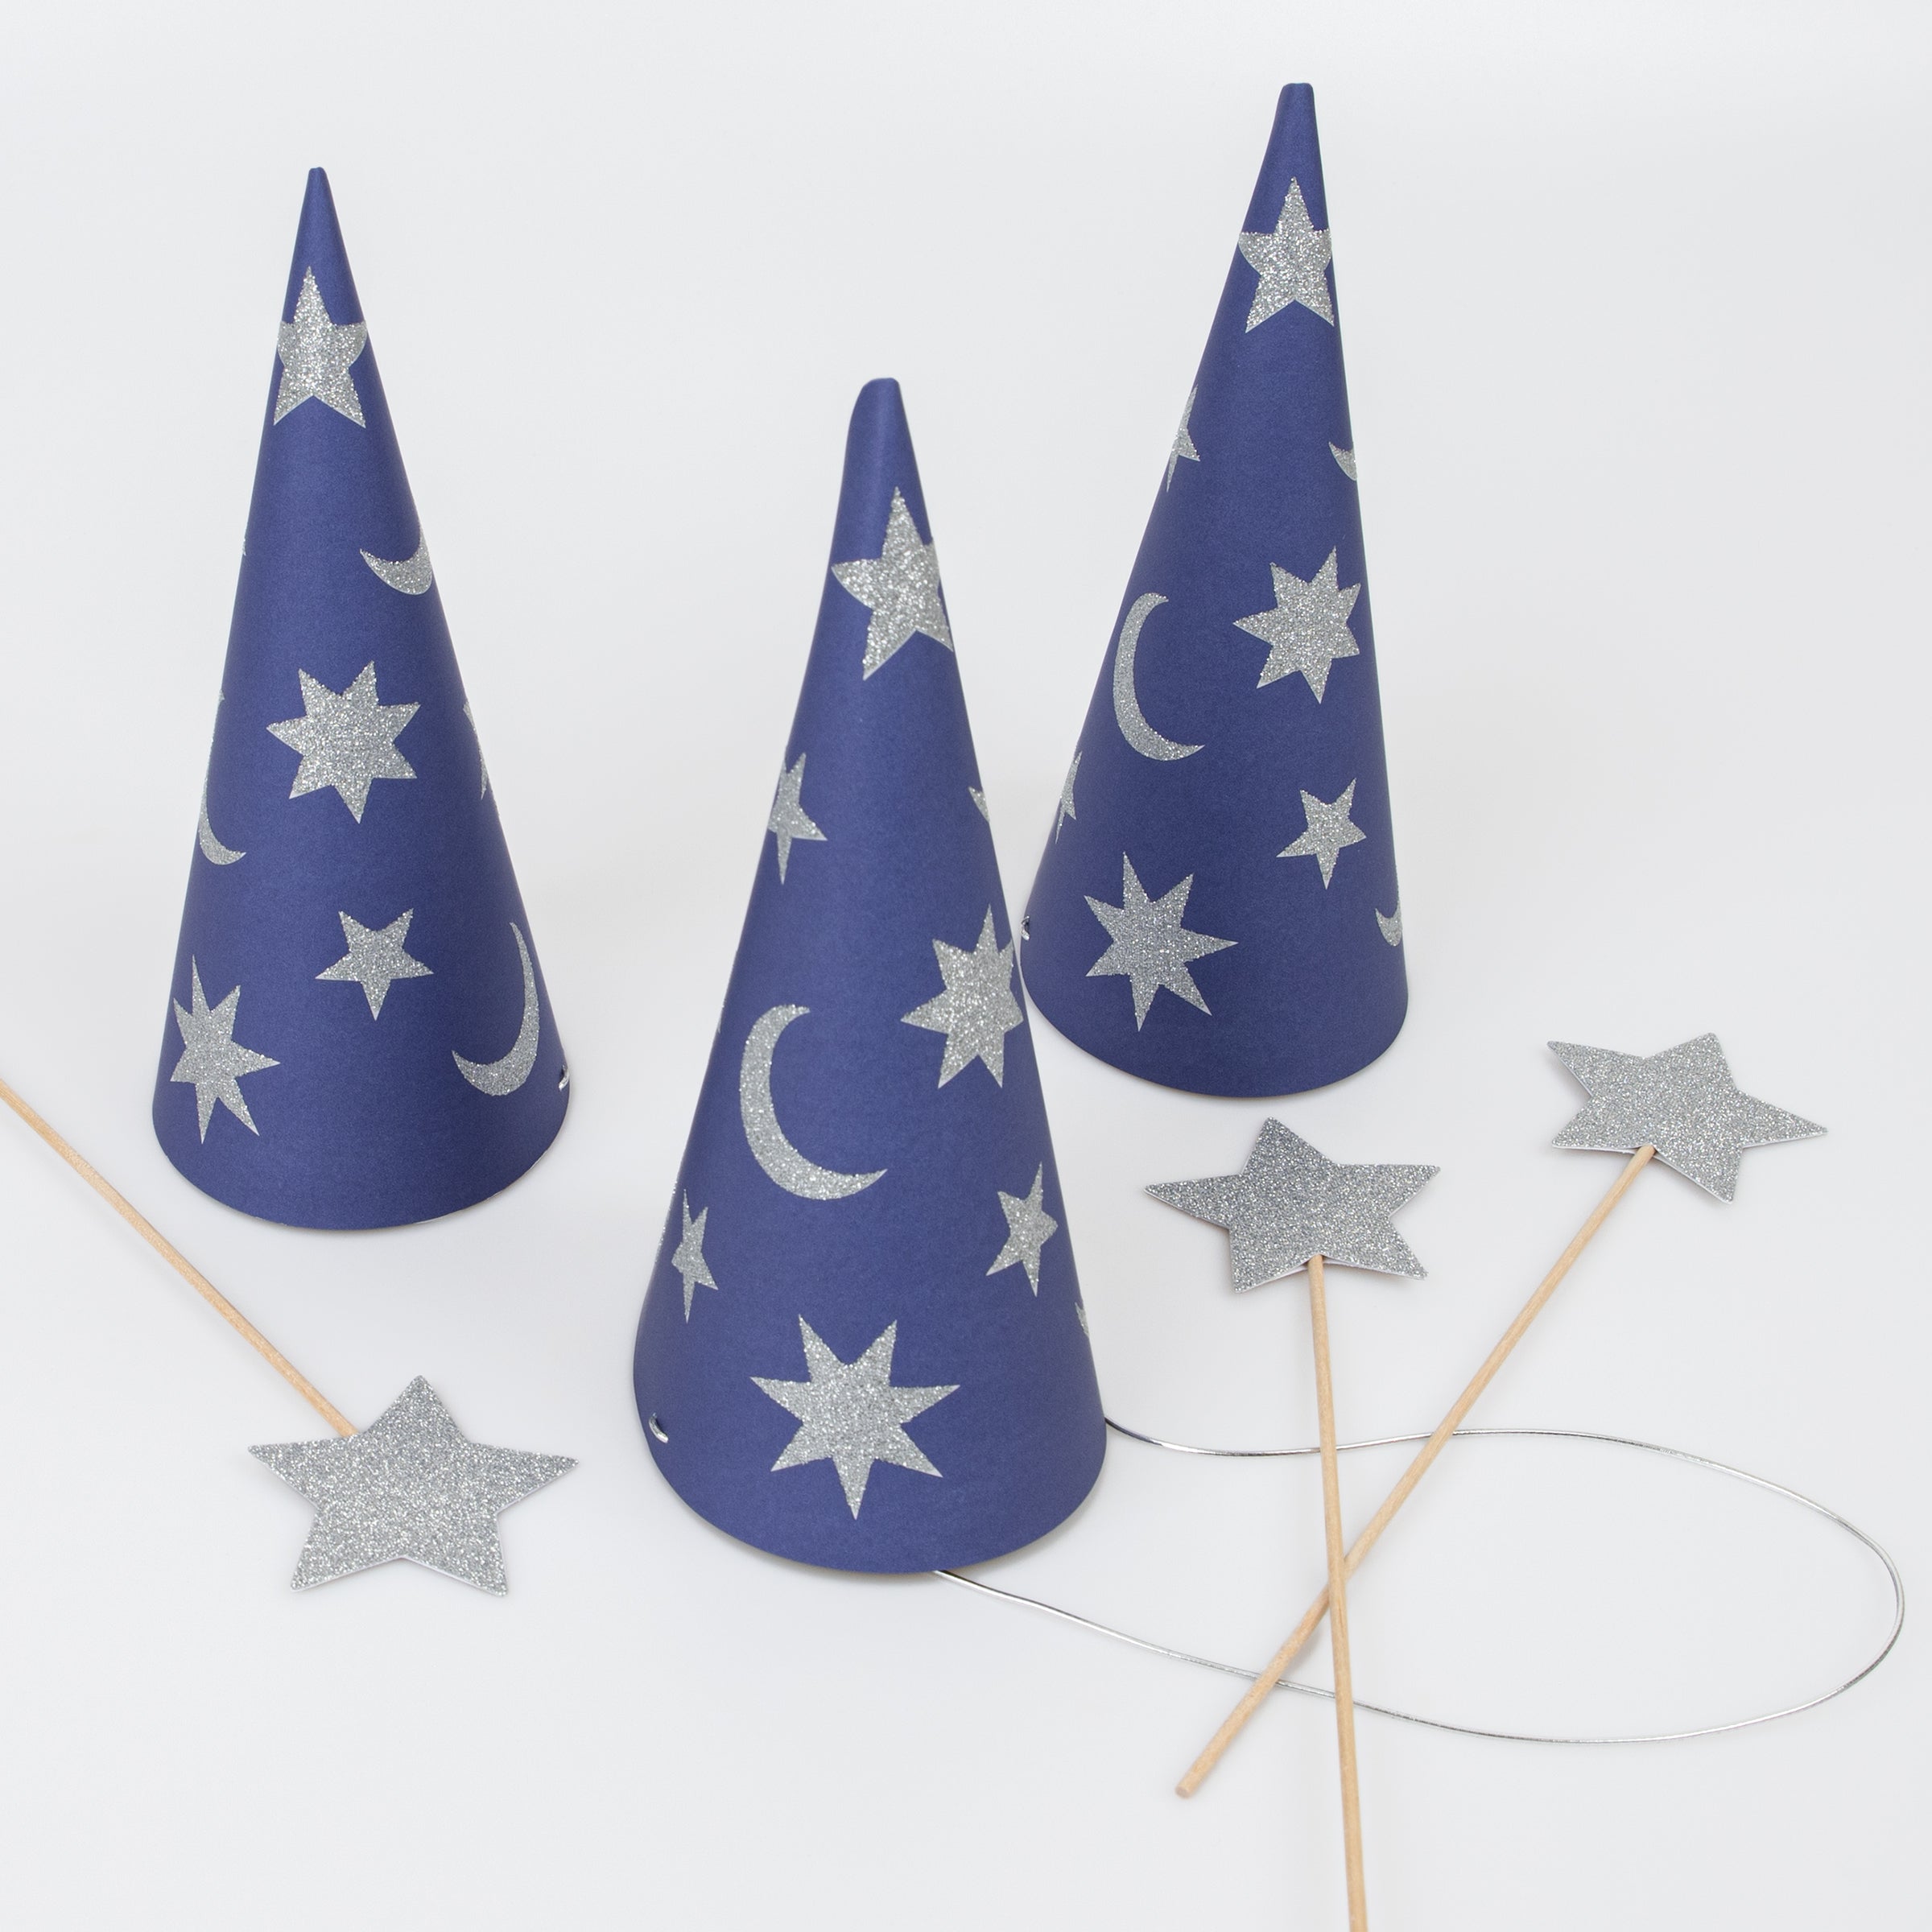 Our blue party hats, in the shape of a wizards hat, match perfectly with our wizard wands.